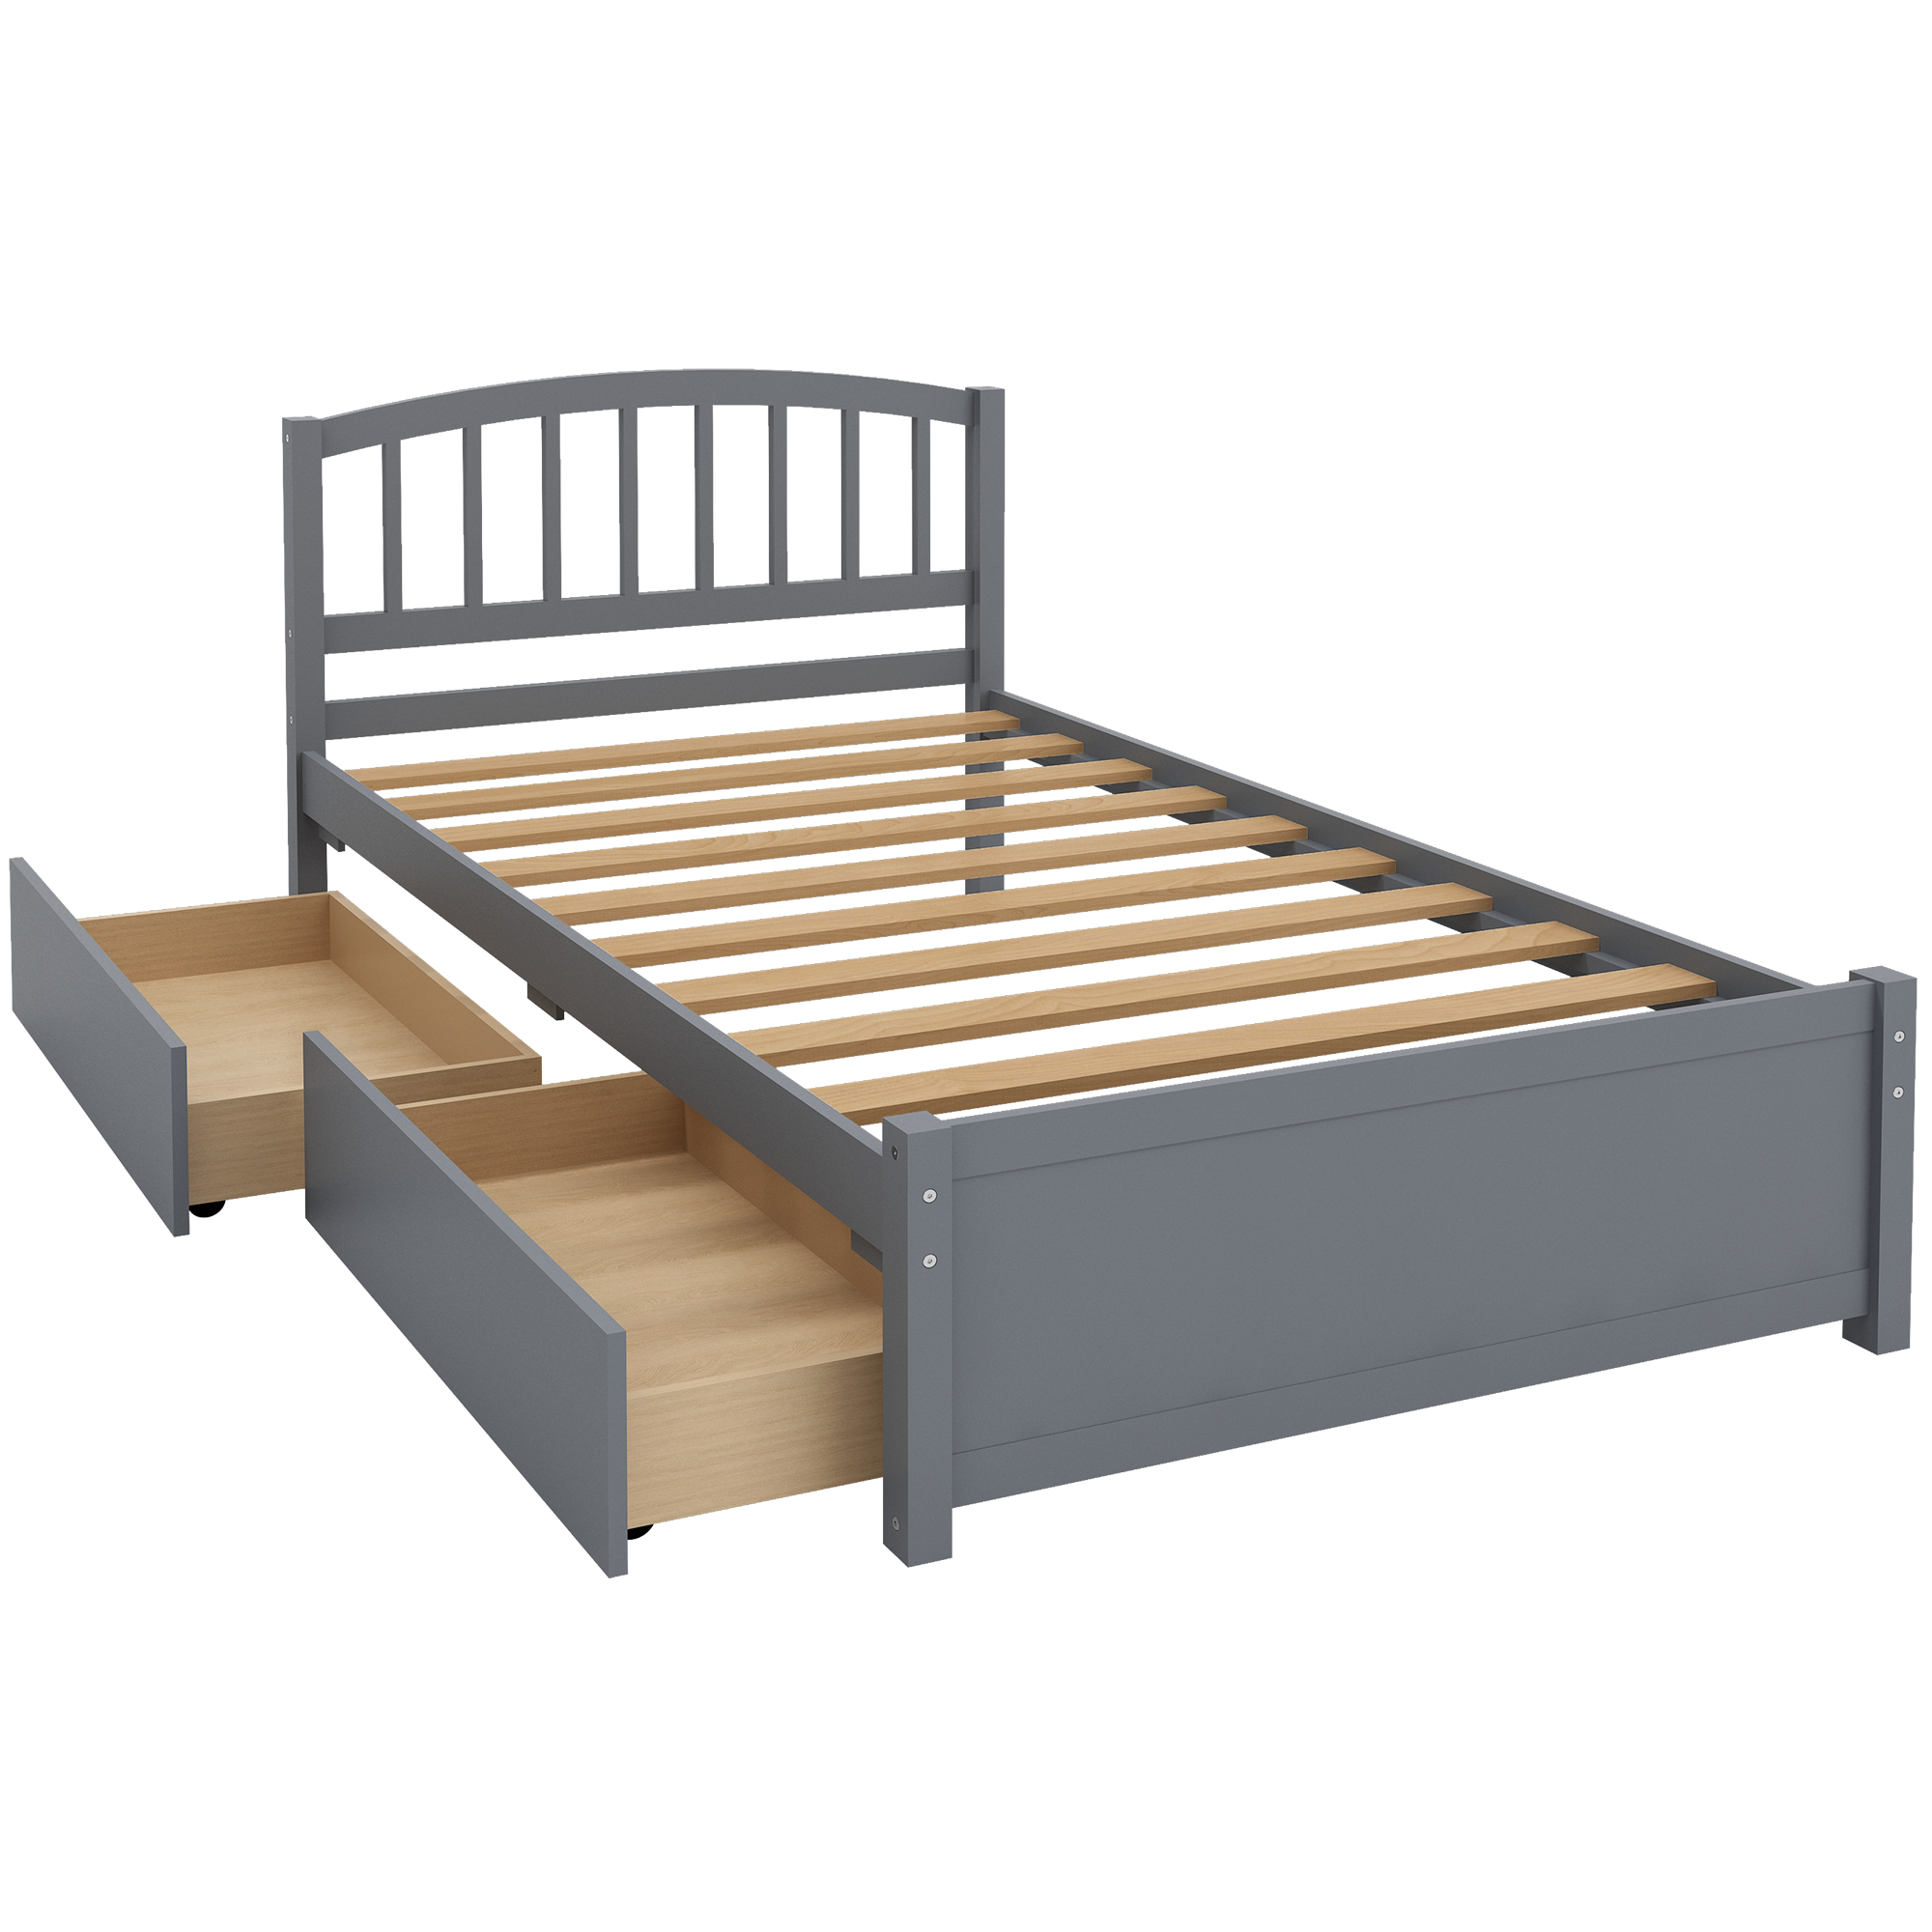 PAPROOS Wood Platform Bed with Storage, Twin Size Bed Frame with 2 Drawers, No Box Spring Needed, Gray - image 2 of 11